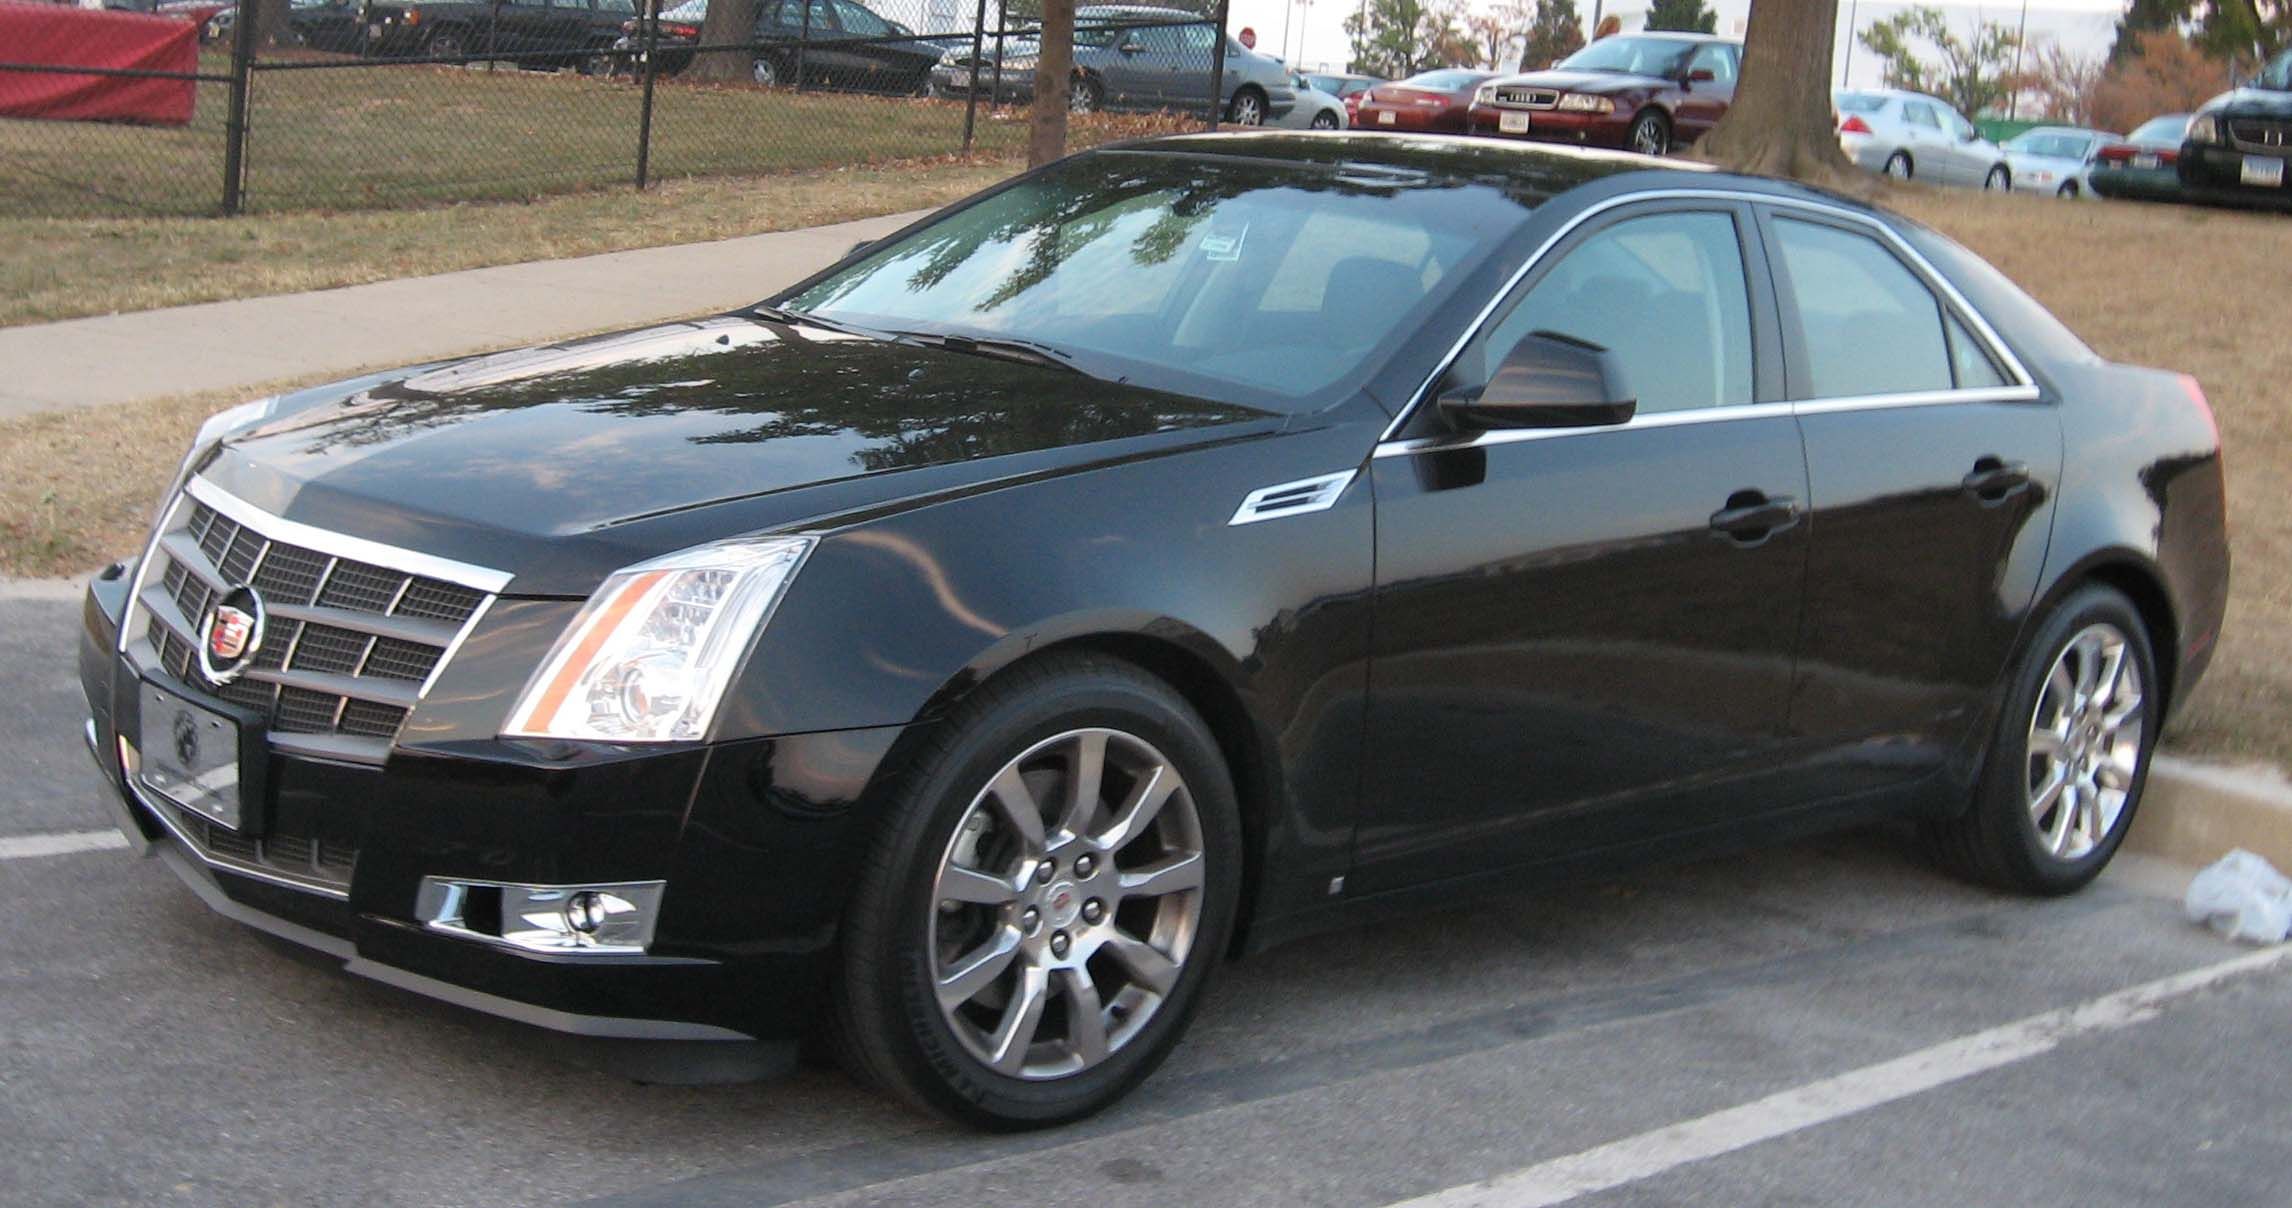 2008 Cadillac CTS 1SA 0-60 Times, Top Speed, Specs, Quarter Mile, and